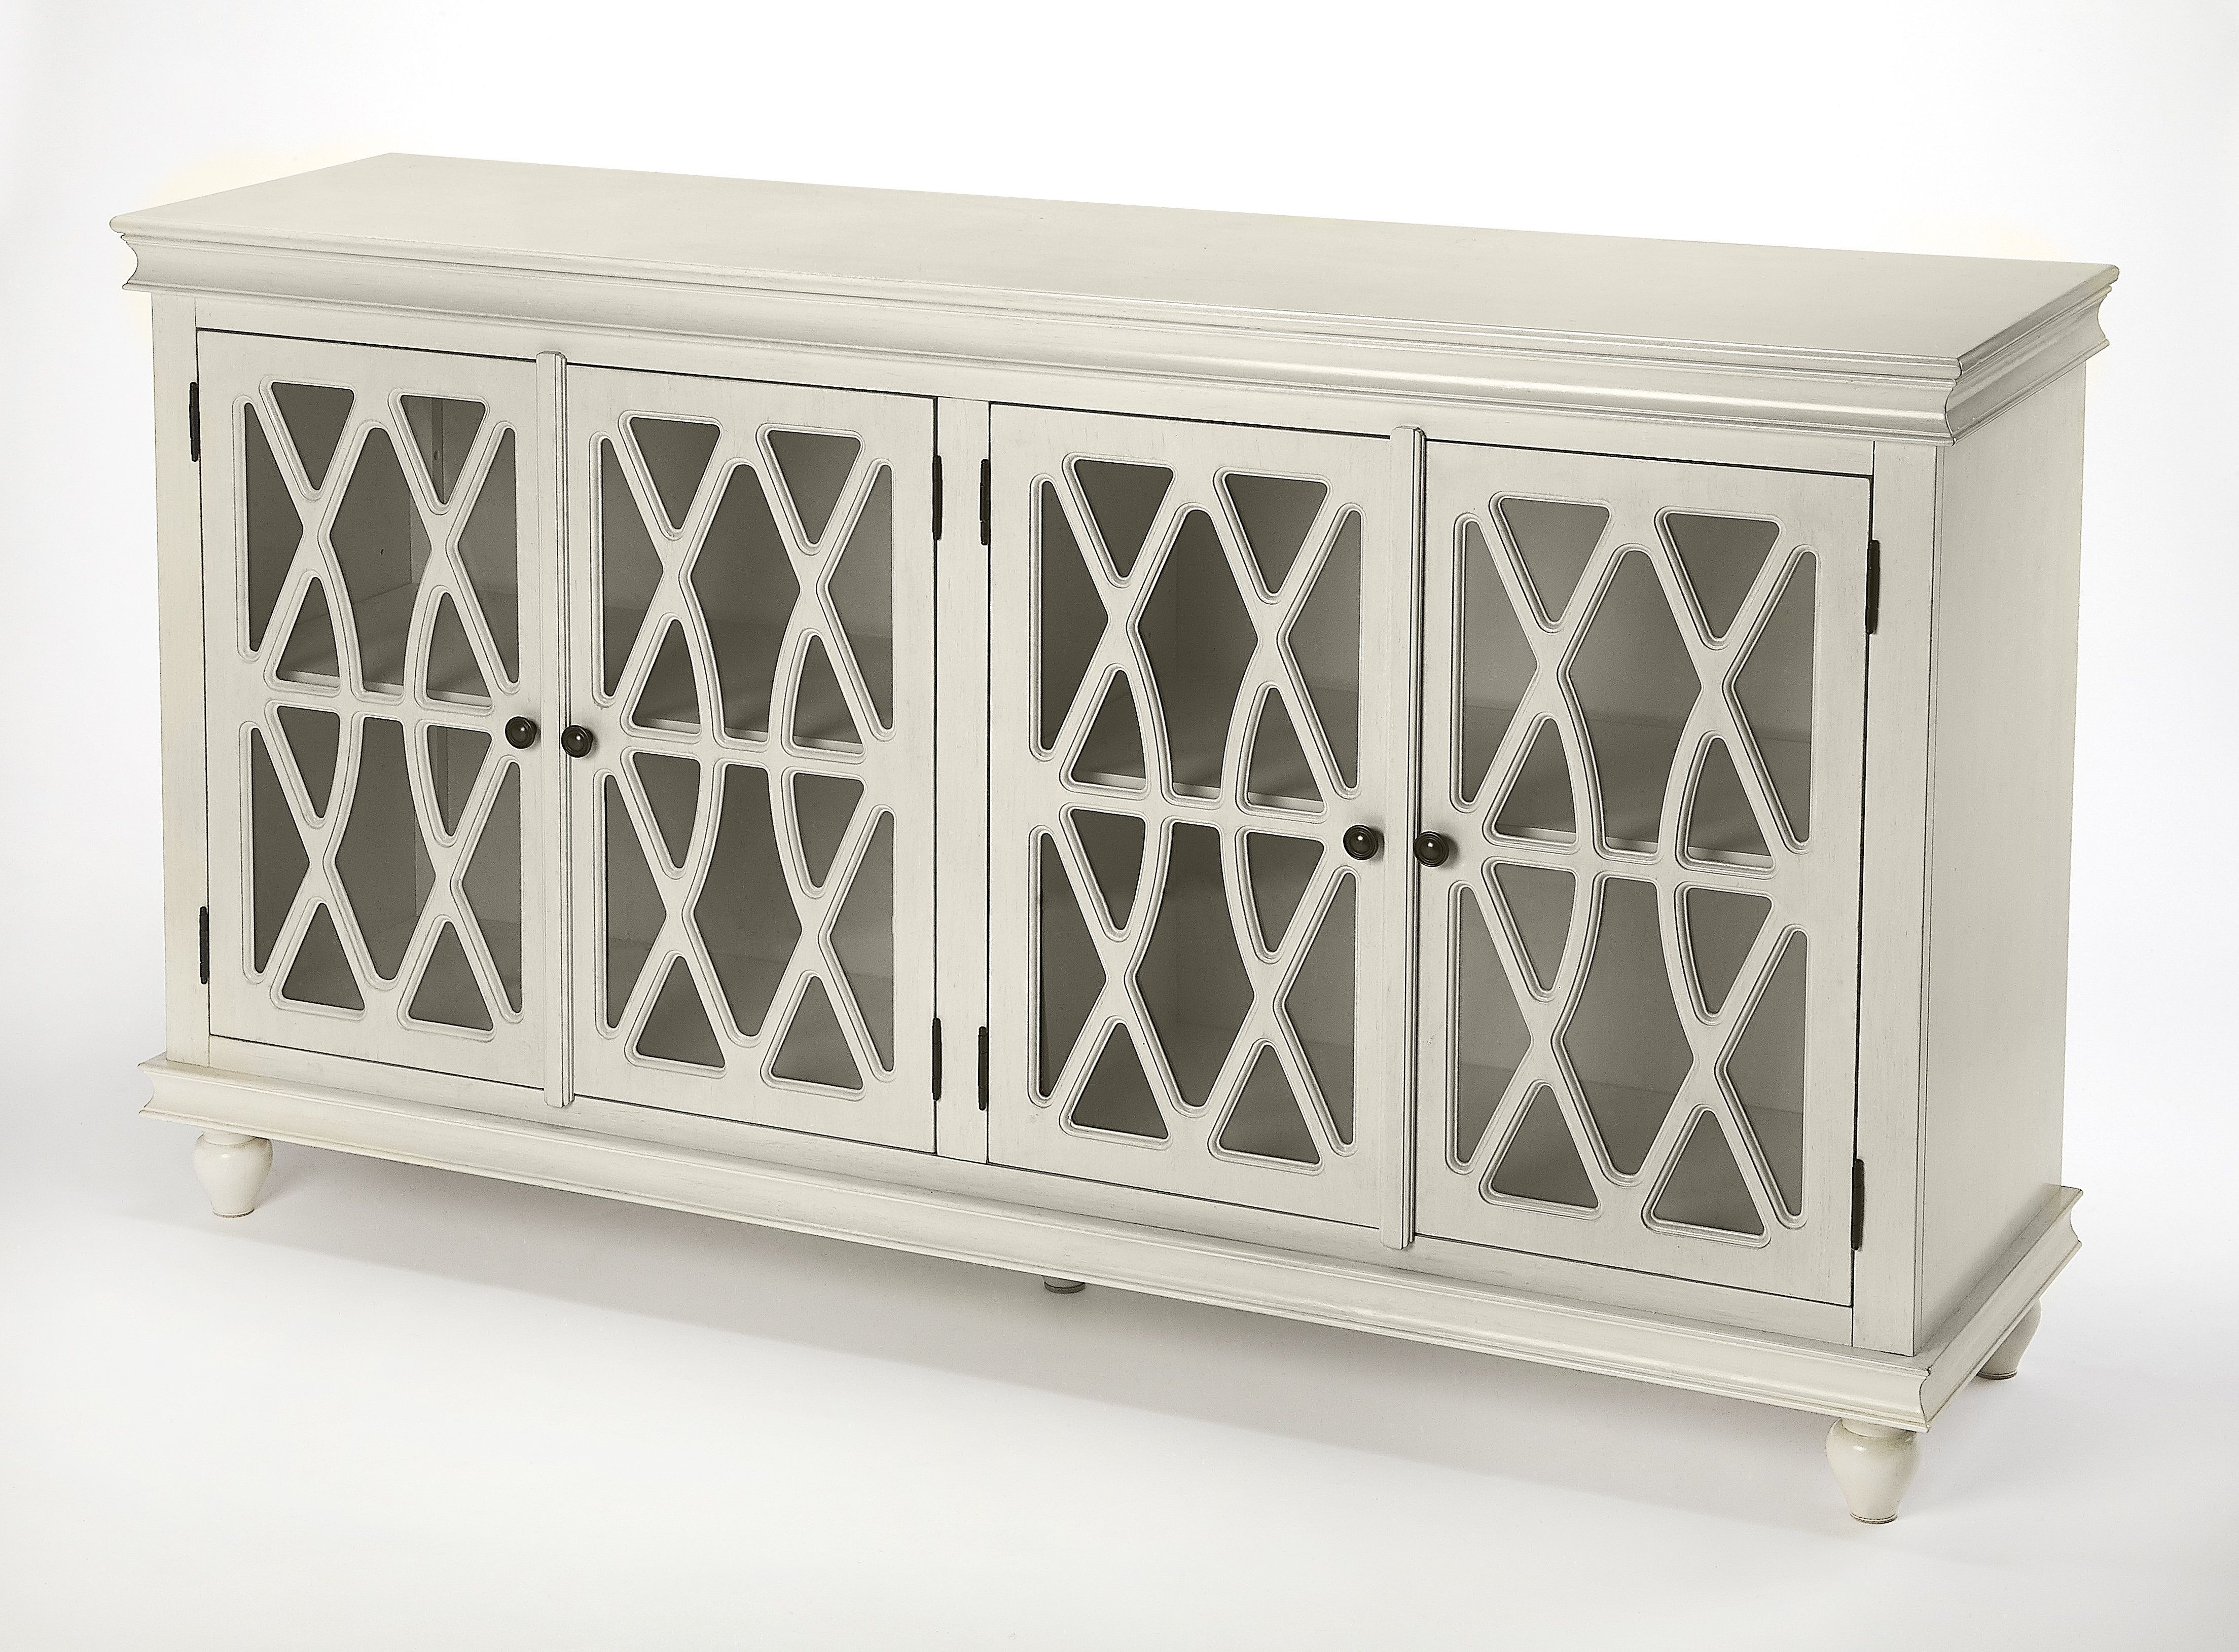 Lansing Sideboard Pertaining To Best And Newest Raquette Sideboards (View 10 of 20)